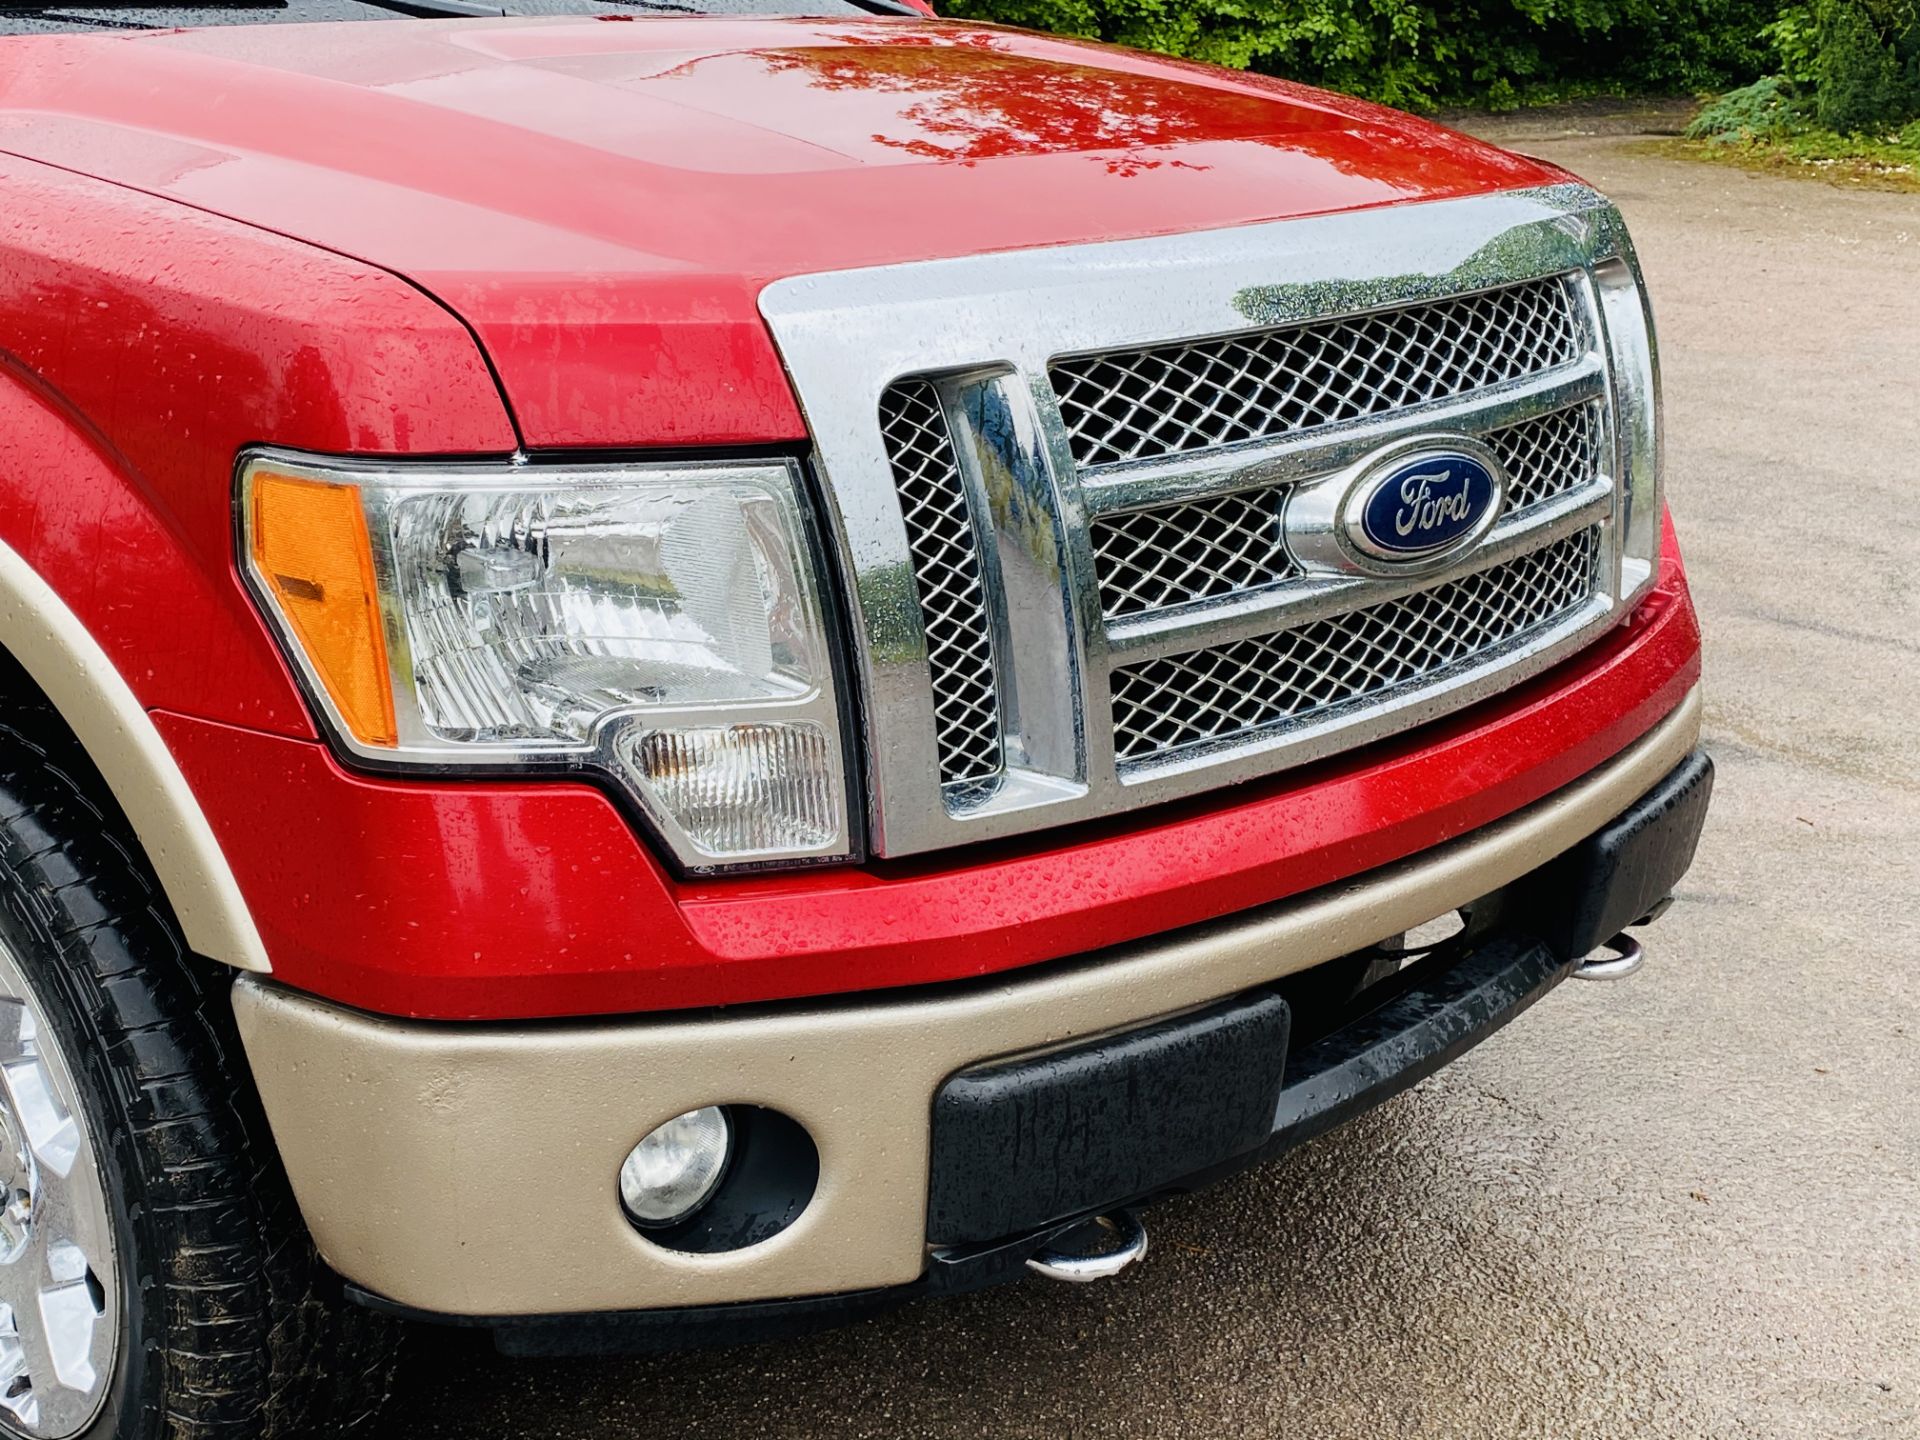 (RESERVE MET)Ford F-150 3.5L V6 Eco-Boost Super-Crew Cab Lariat Model '2012 Year' 4x4 - Fully Loaded - Image 36 of 78